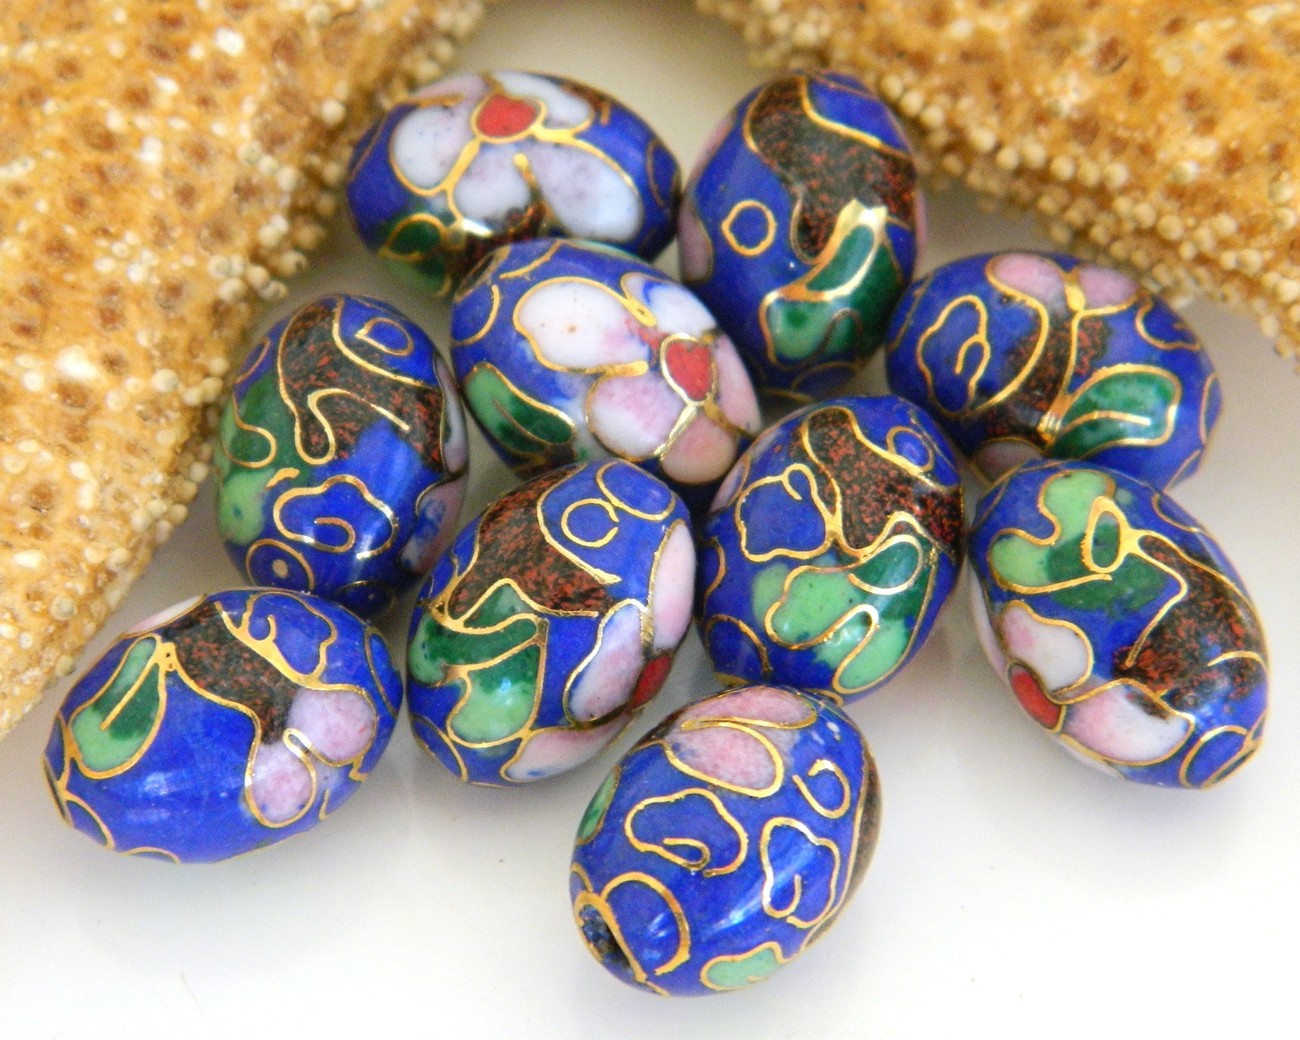 Vintage 10 Cloisonne Beads Oval Chinese Cobalt Blue Flowers Blossoms ...